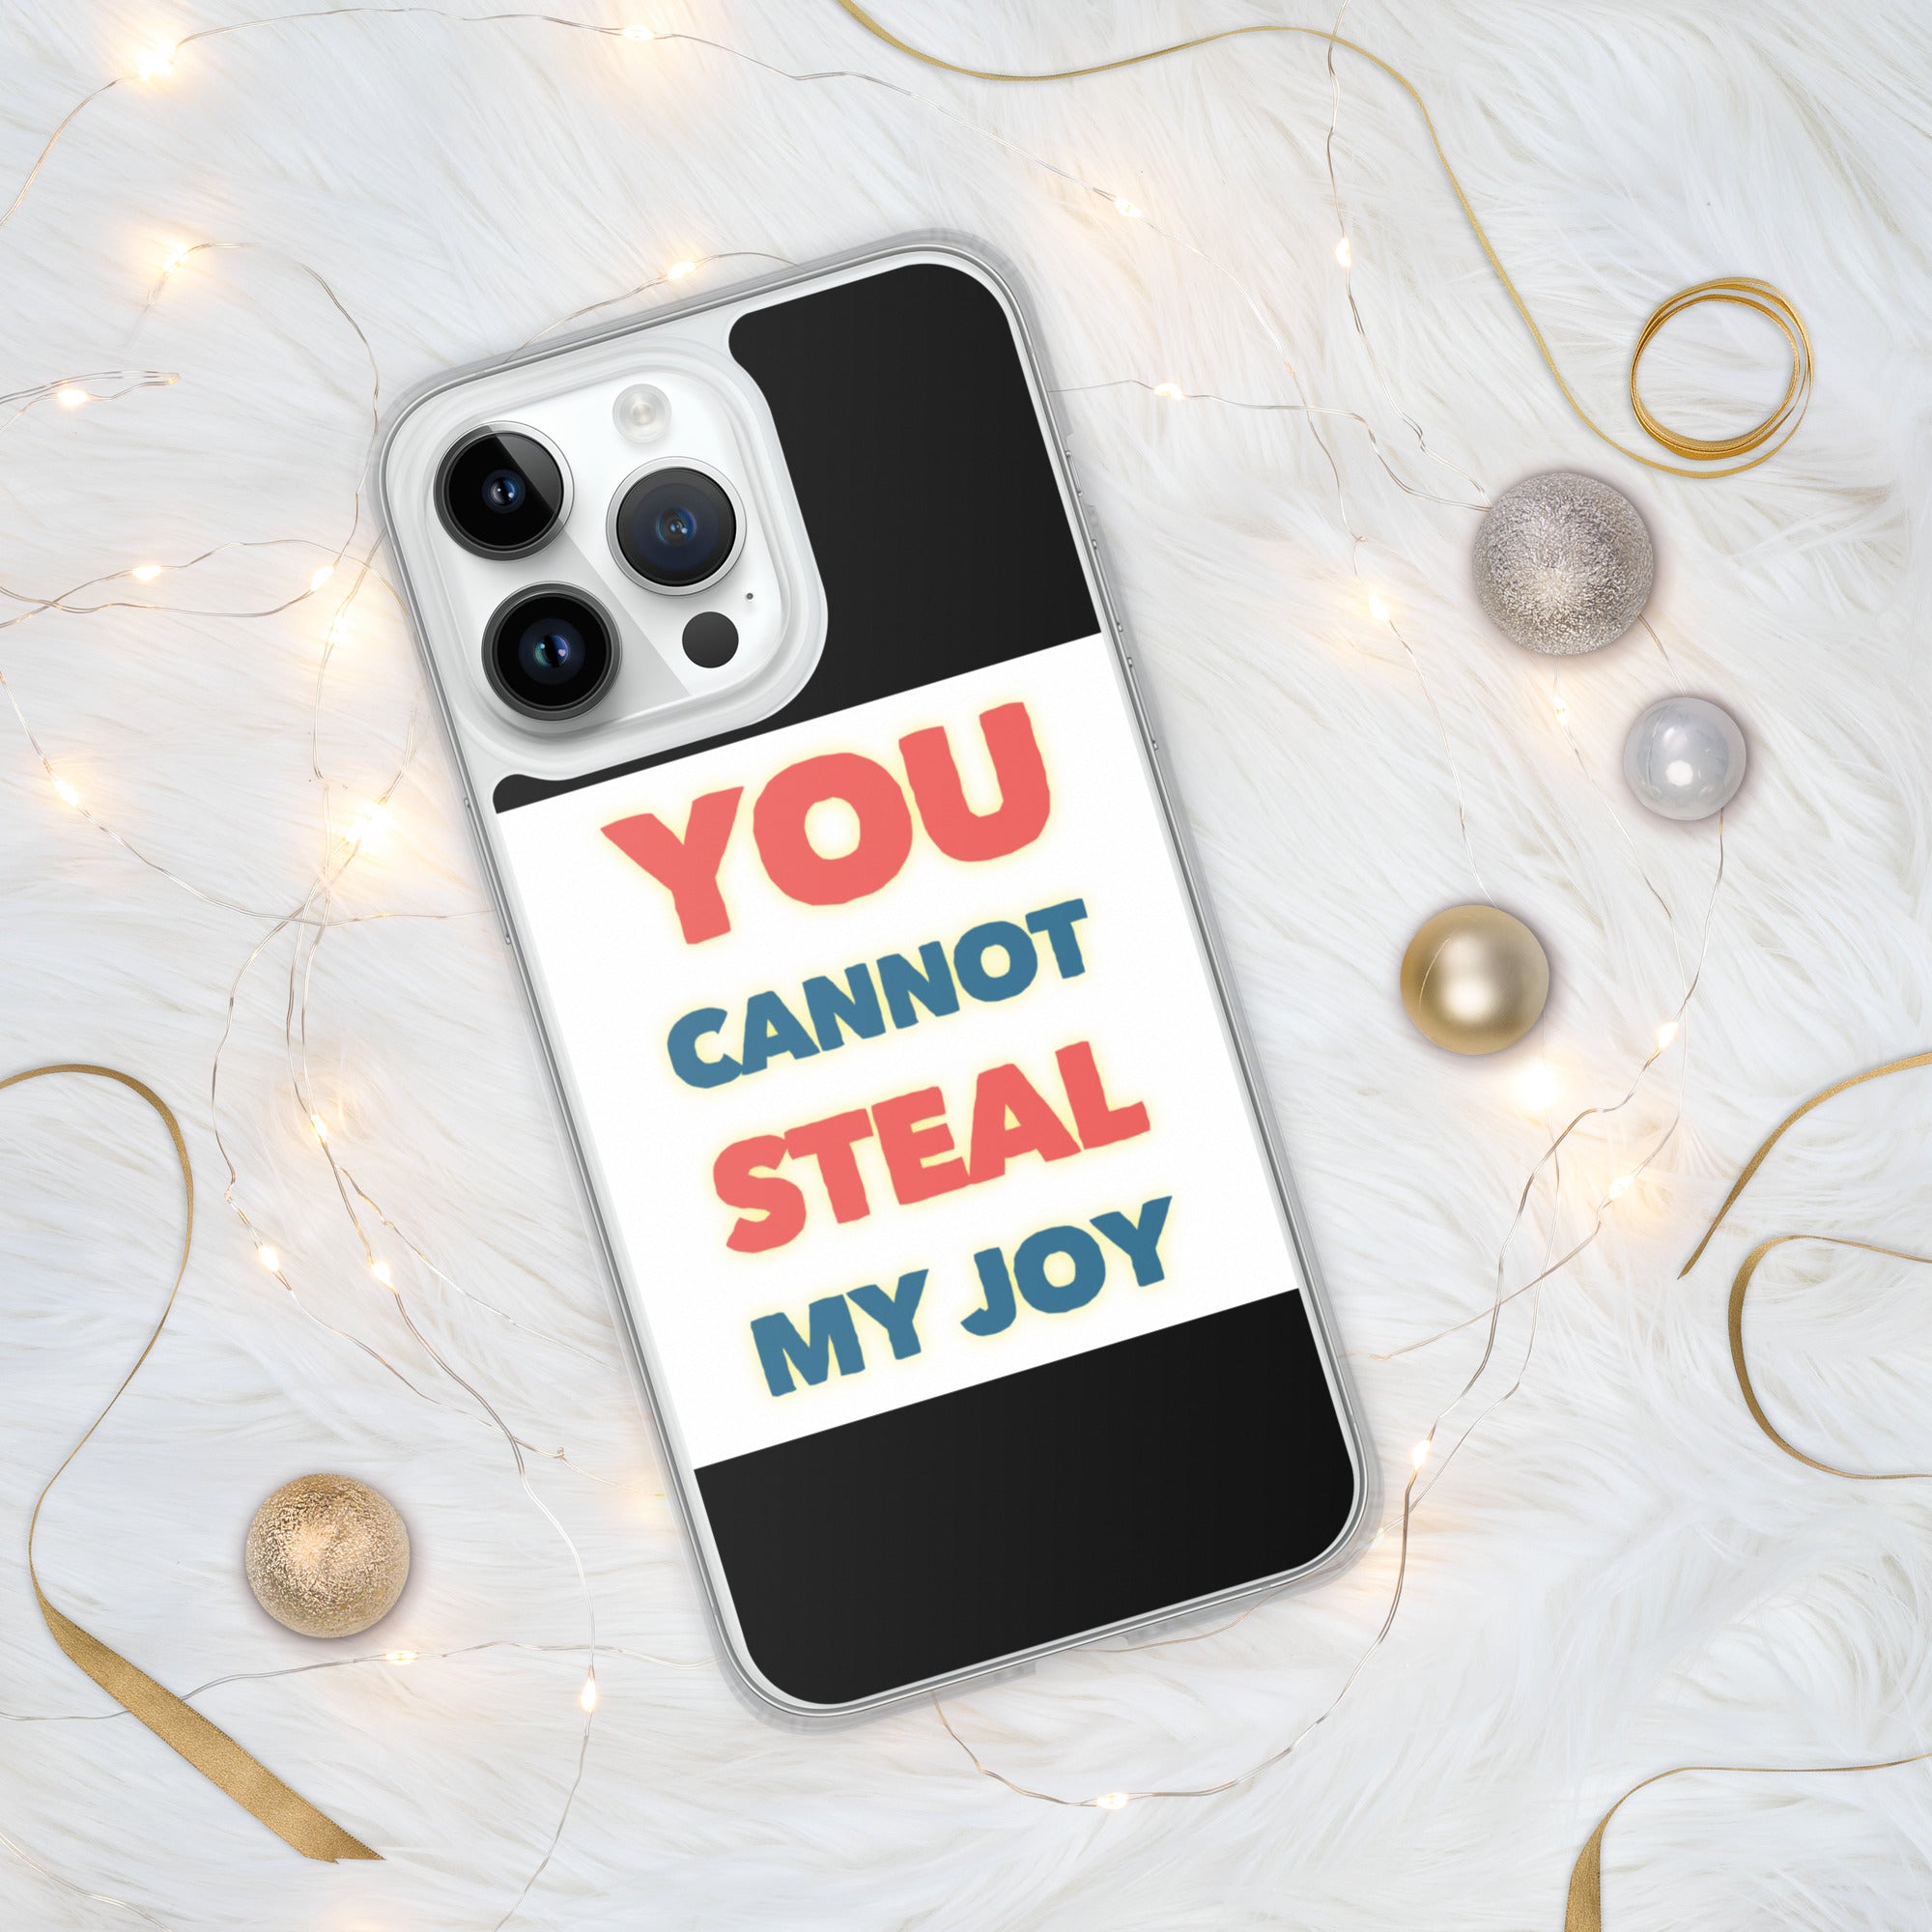 GloWell Designs - iPhone Case - Affirmation Quote - You Cannot Steal My Joy - GloWell Designs